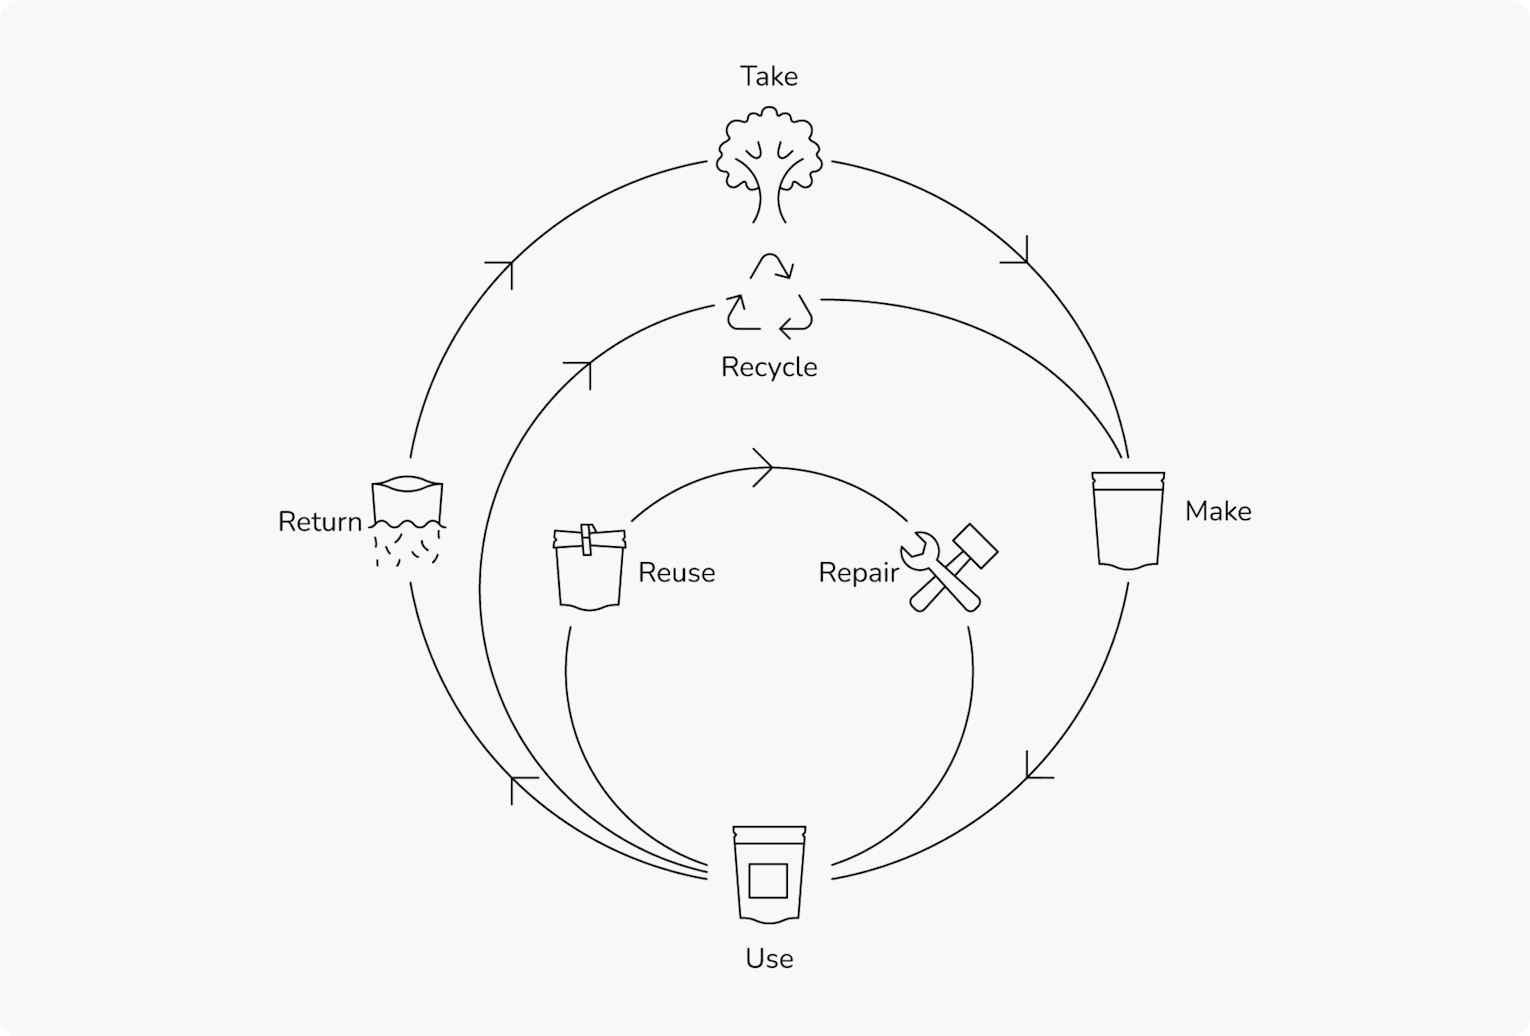 Diagram showing how a circular economy works